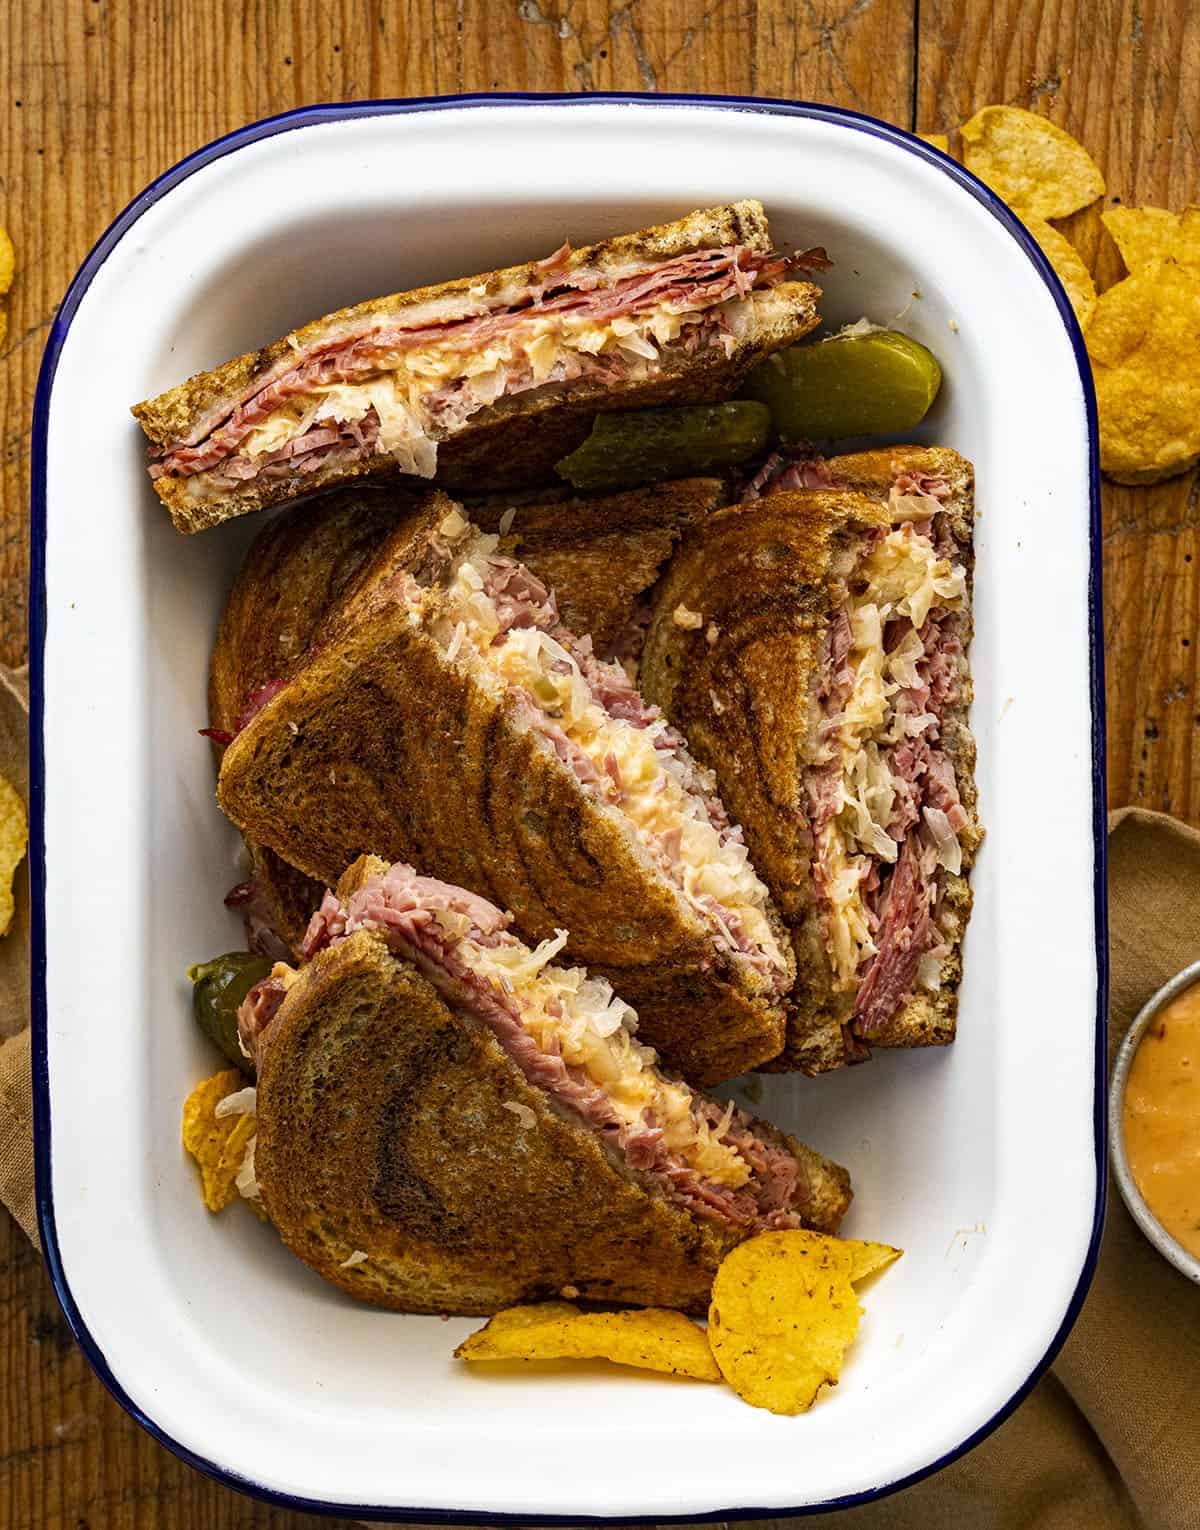 Reuben Sandwiches Cut up and In a Dish with Chips and Sauce